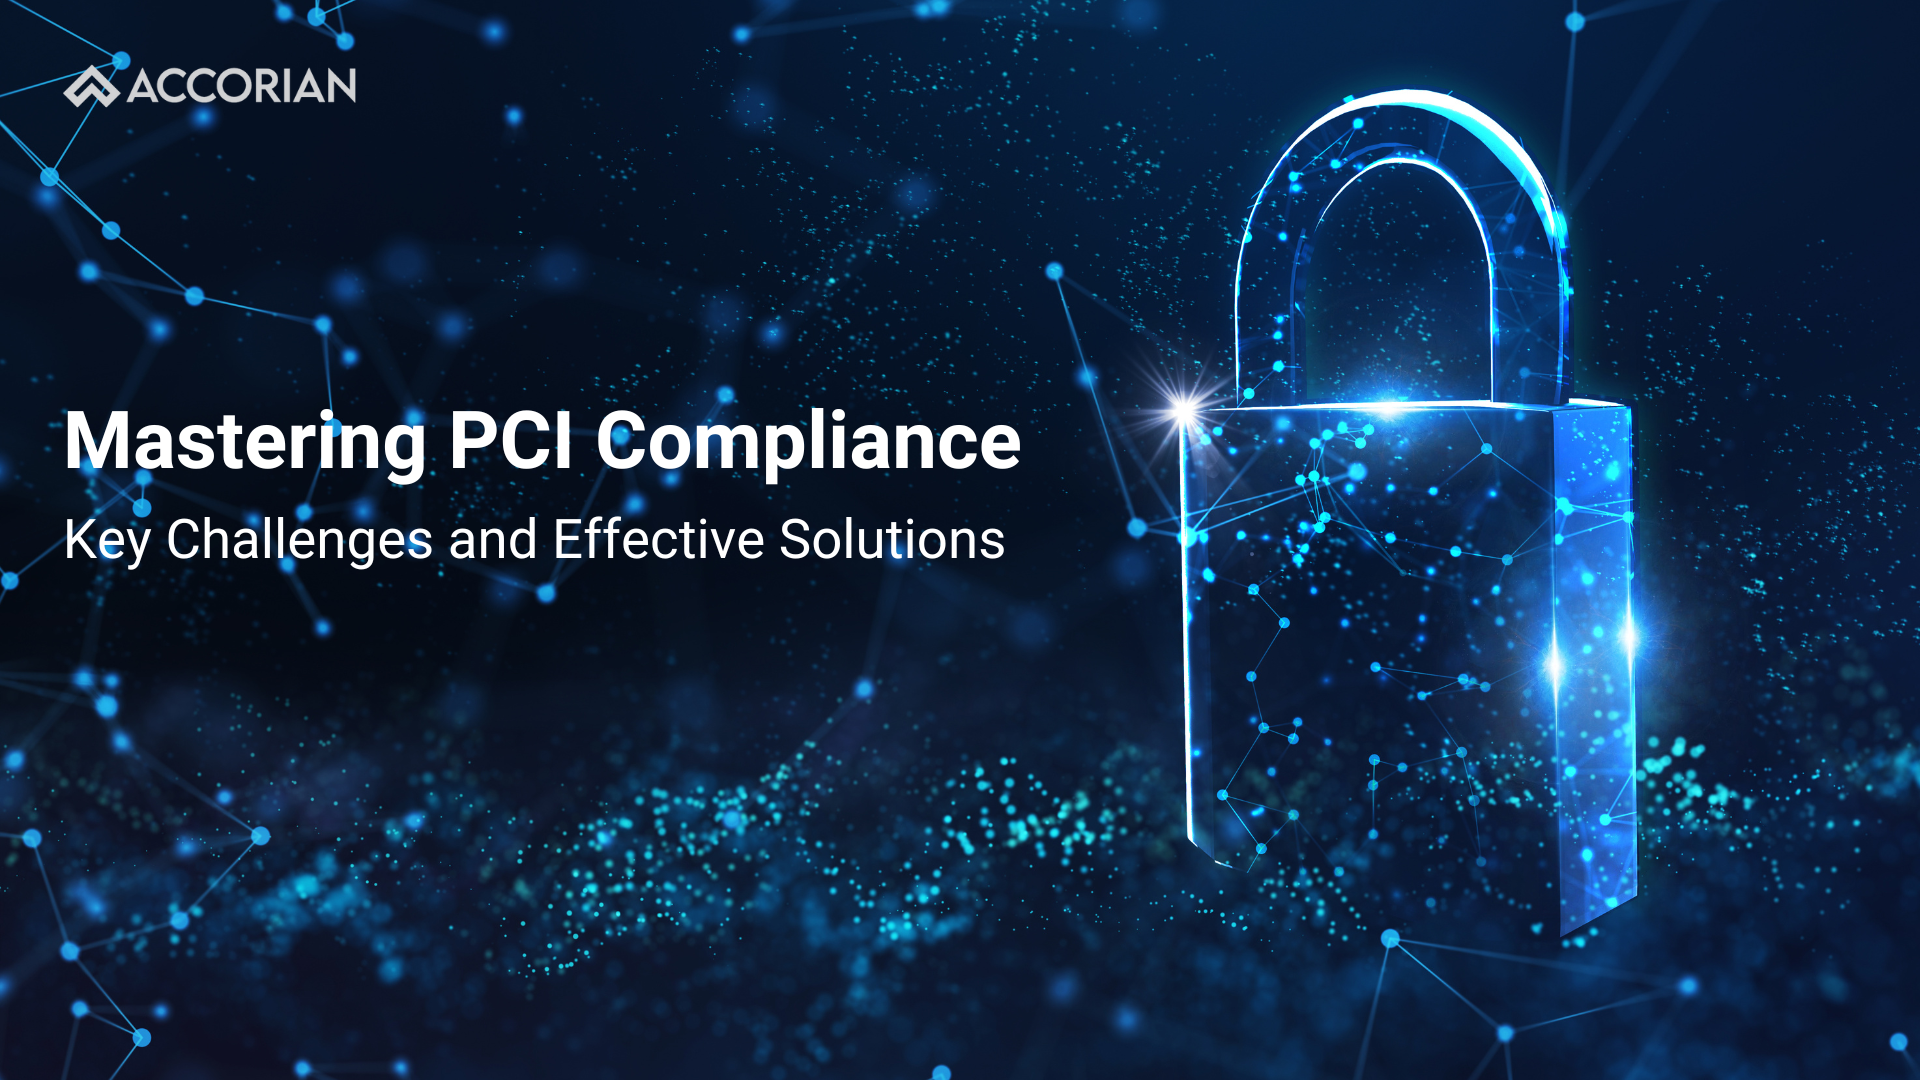 Mastering PCI Compliance: Key Challenges and Effective Solutions